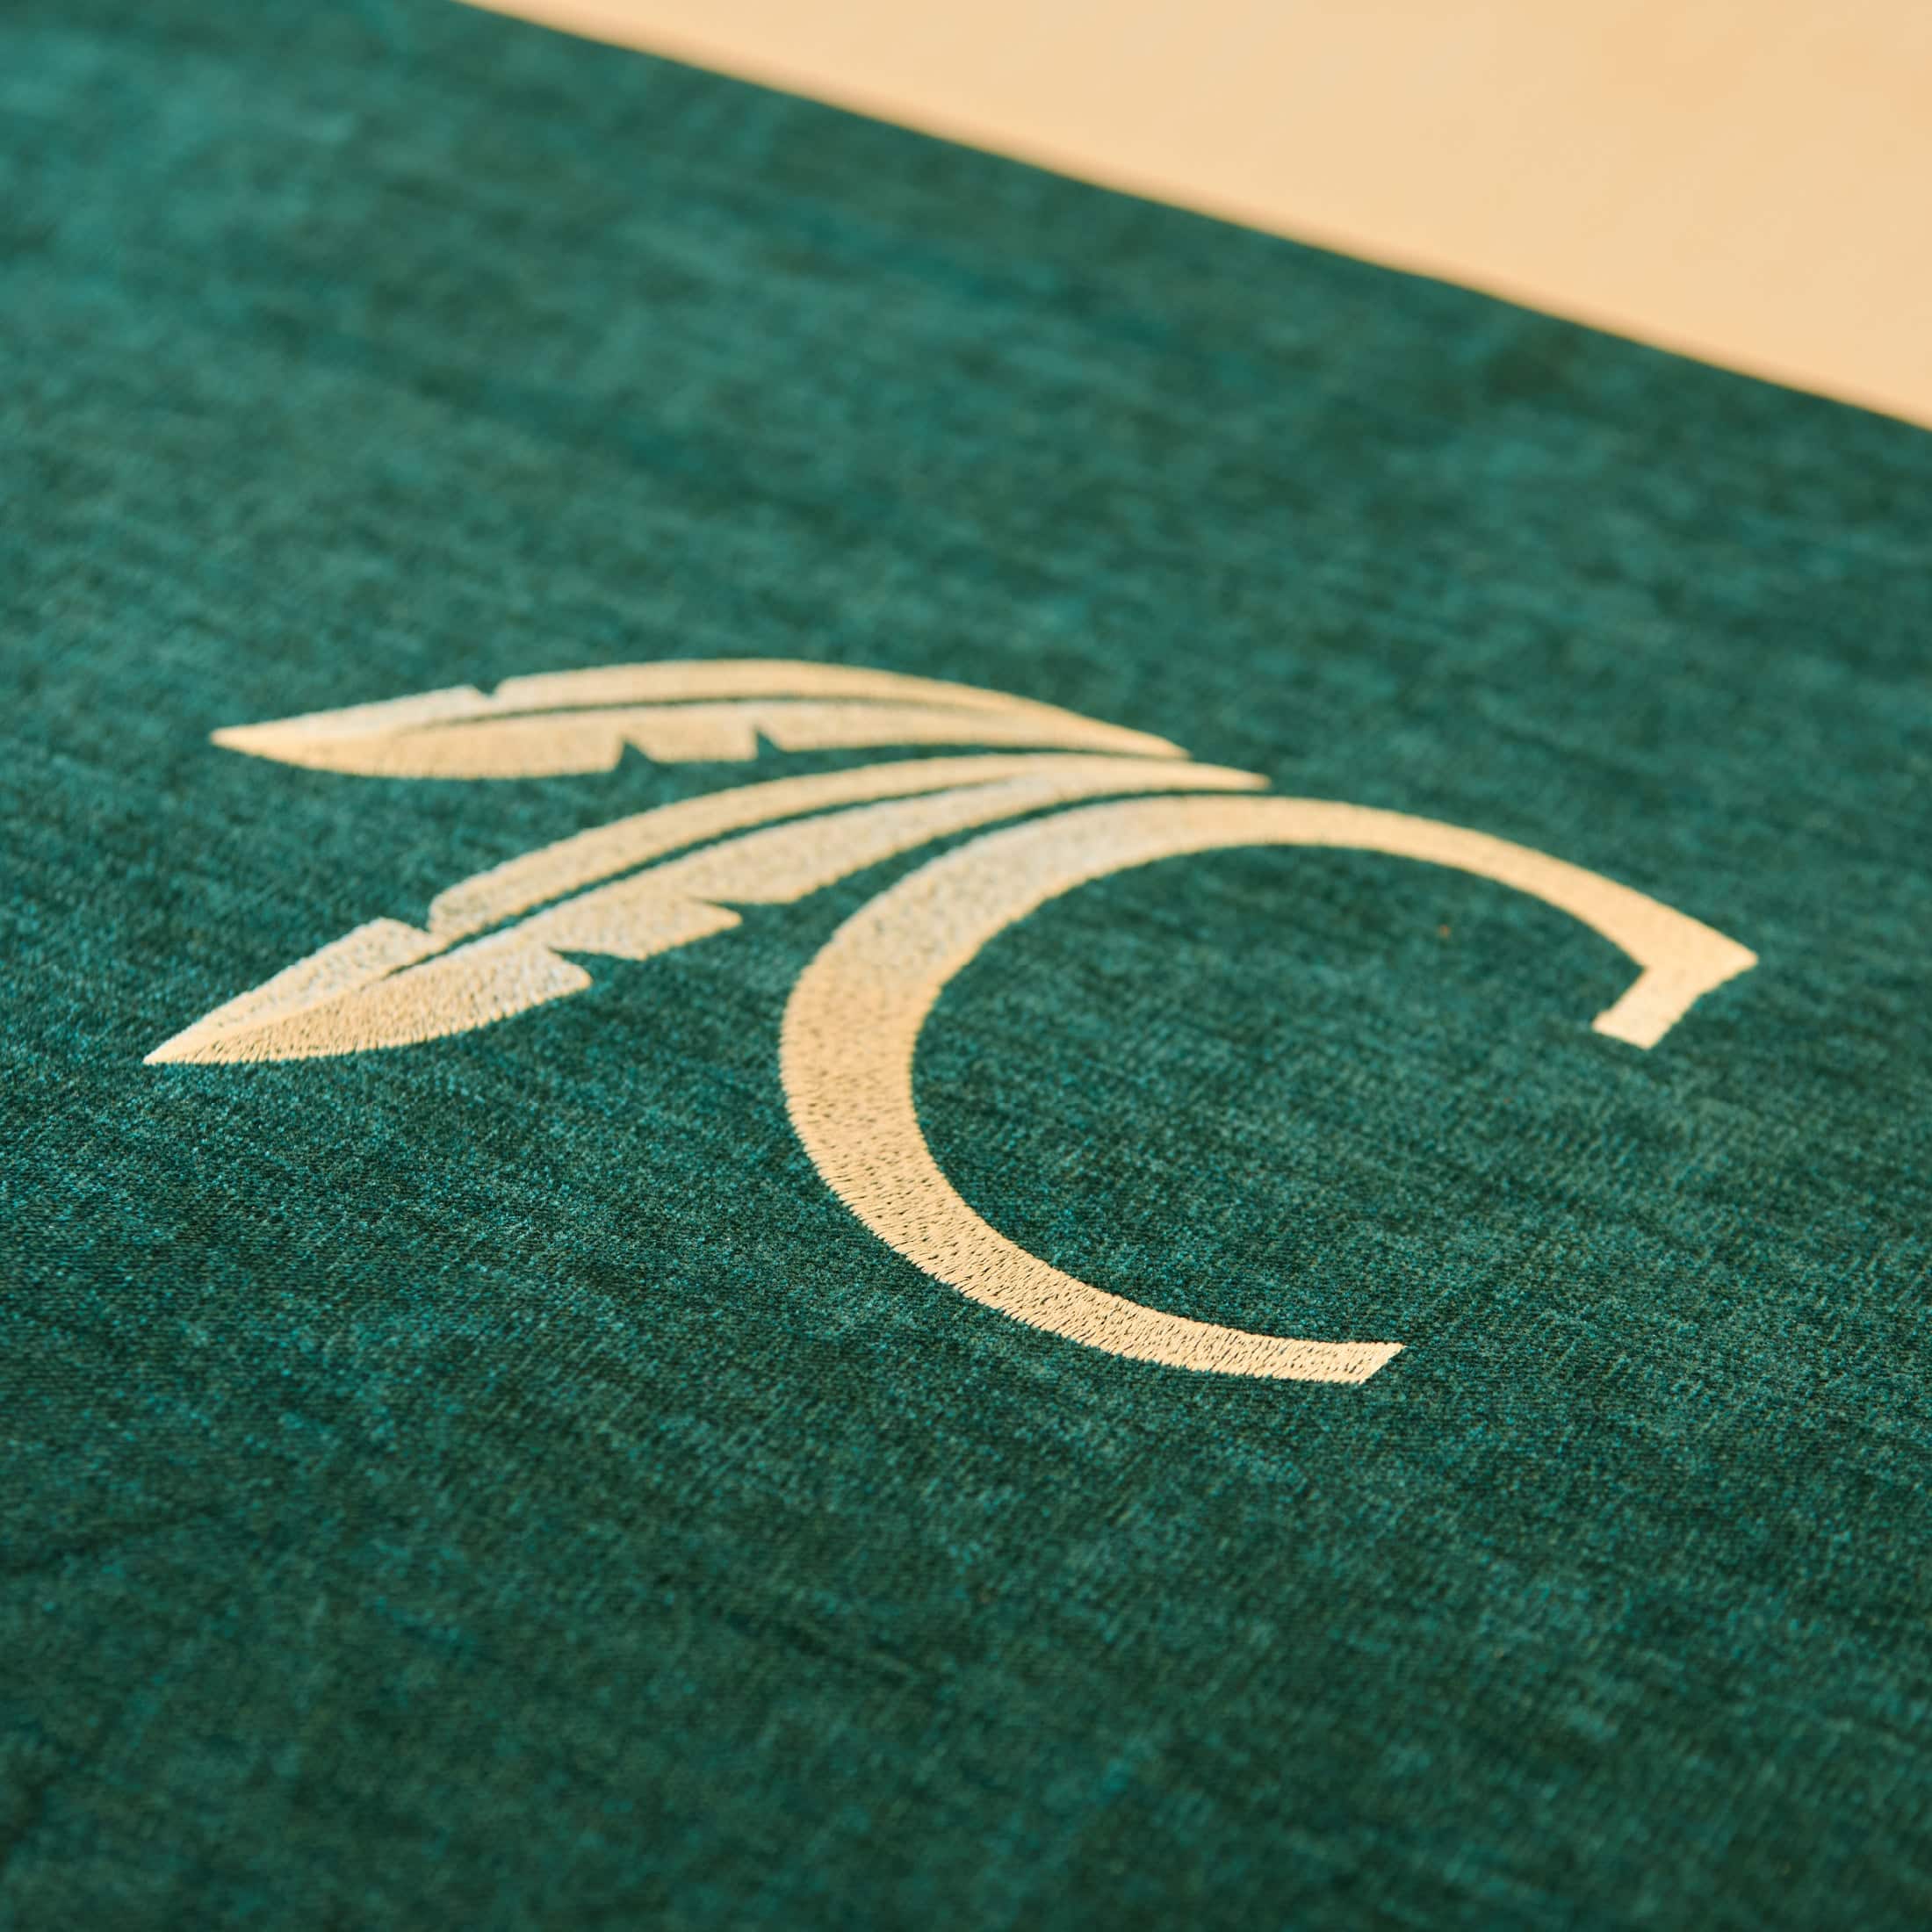 A close-up of the Choctaw "C" logo on a green bedspread.